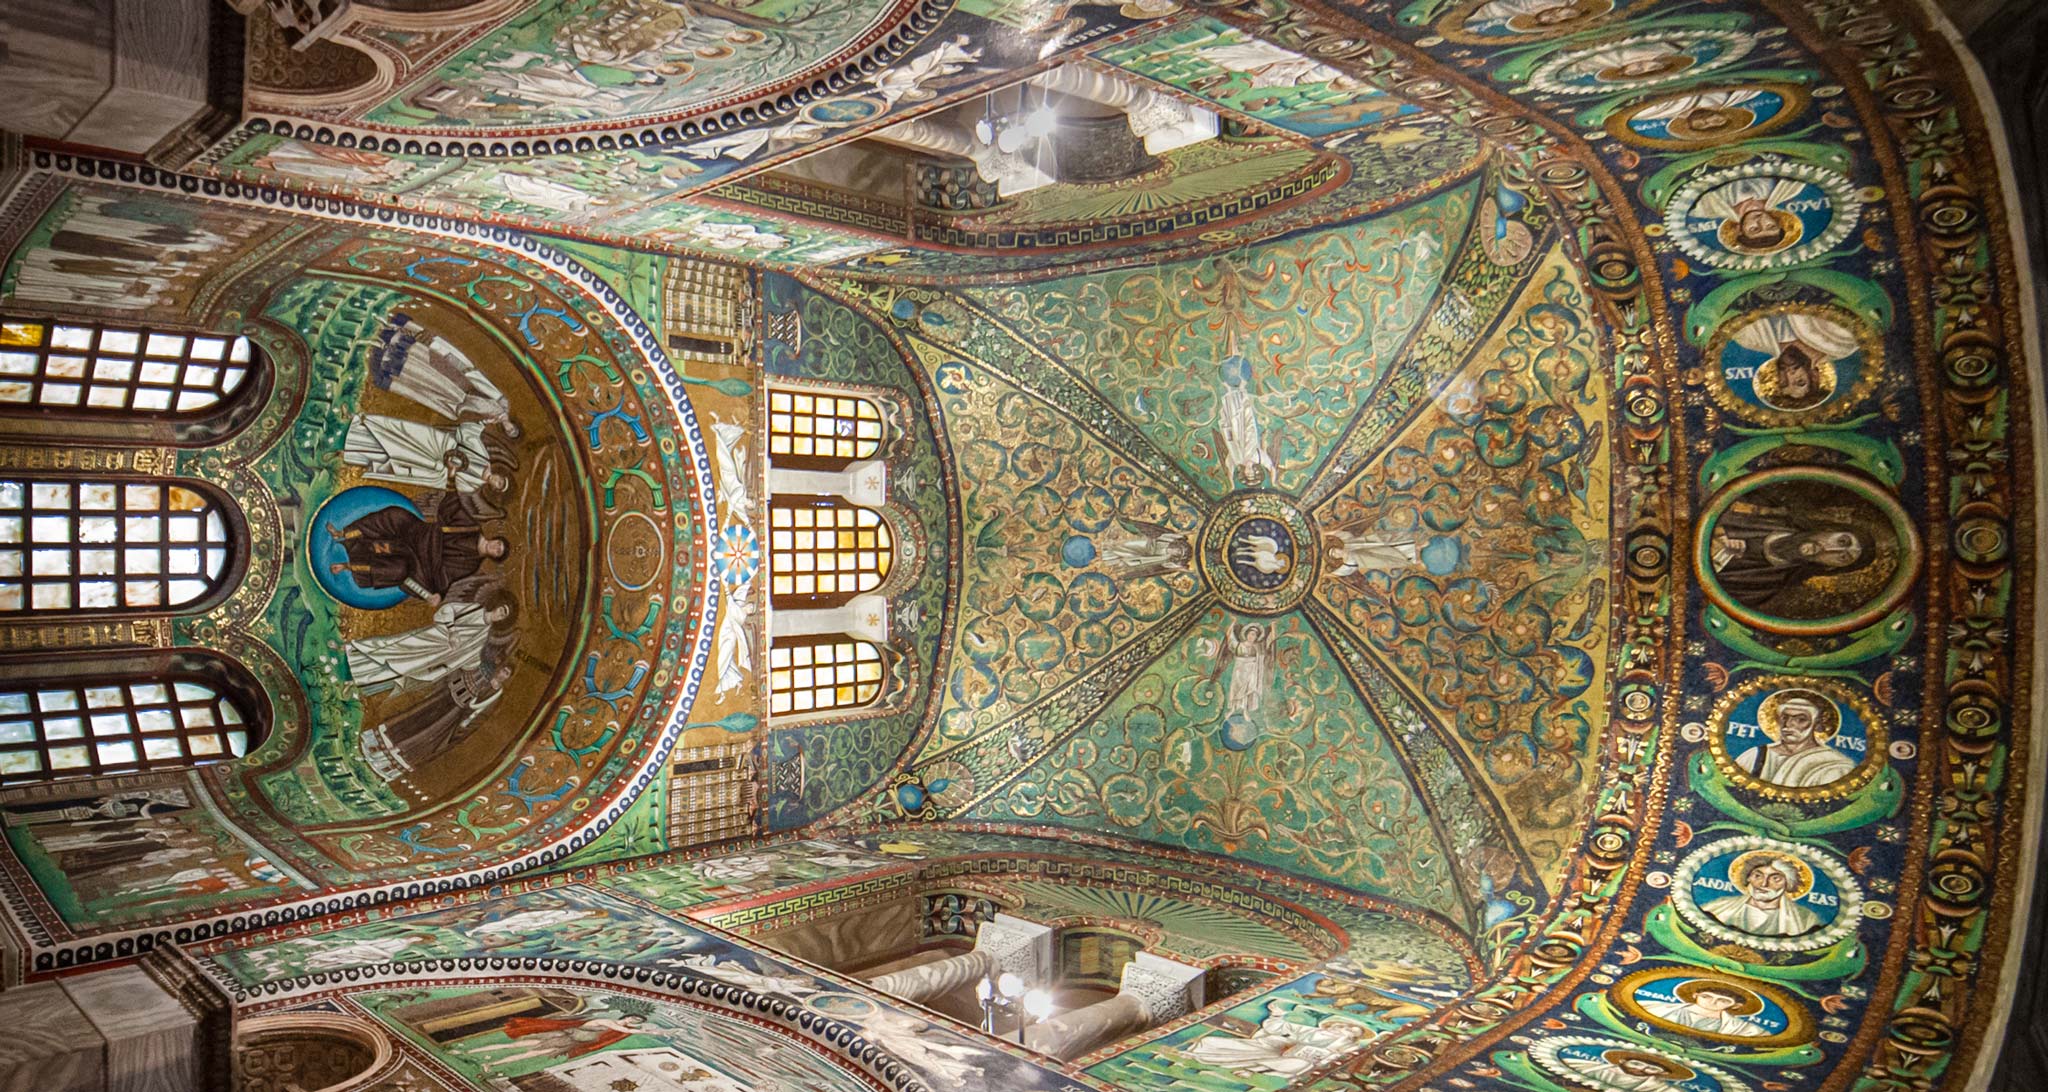 Ravenna is an incredible day trip from Bologna